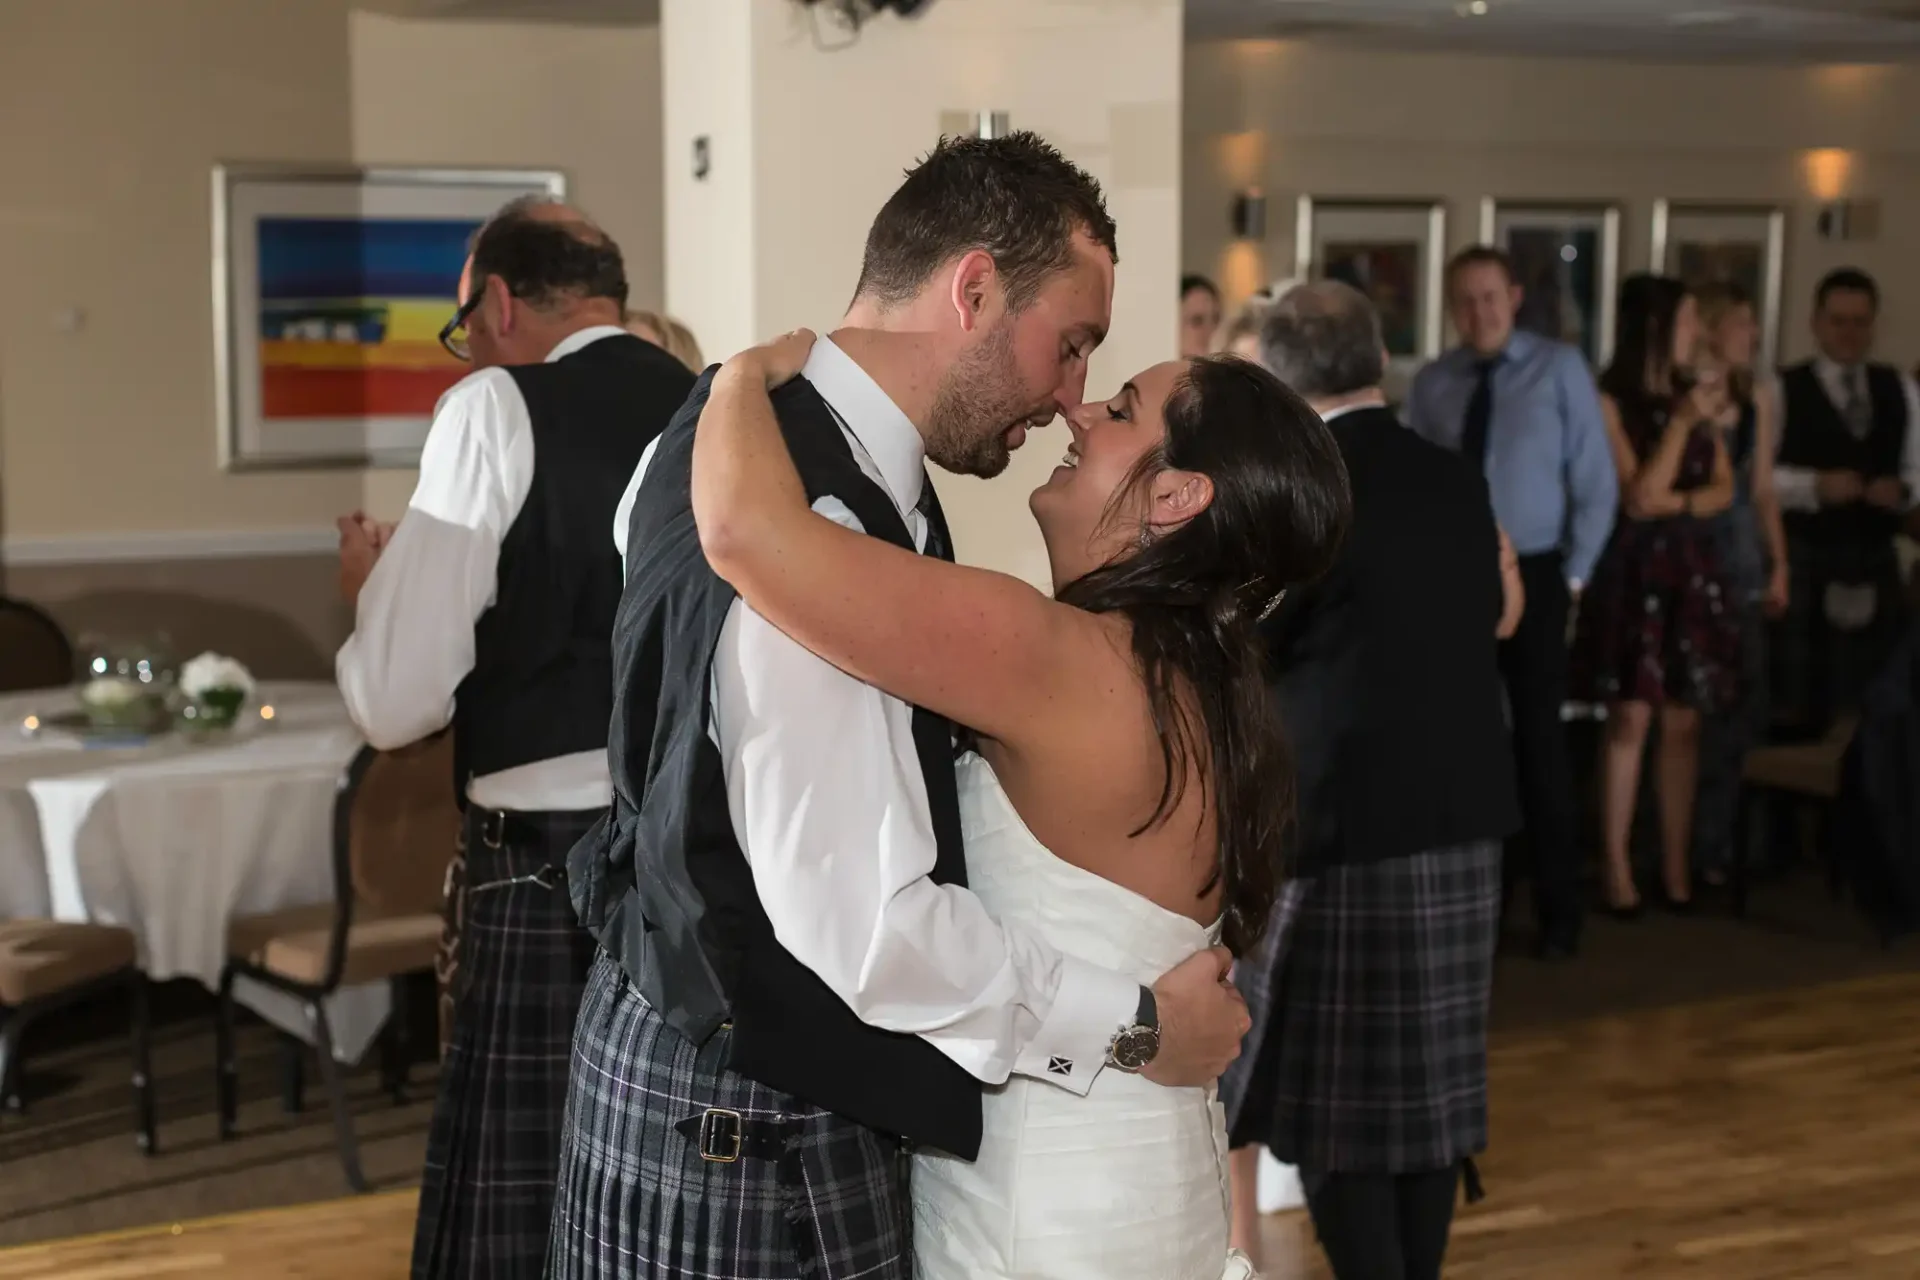 A bride and groom in a tender embrace, sharing a kiss on the dance floor at a wedding reception, surrounded by guests. the groom wears a kilt and the bride a white dress.